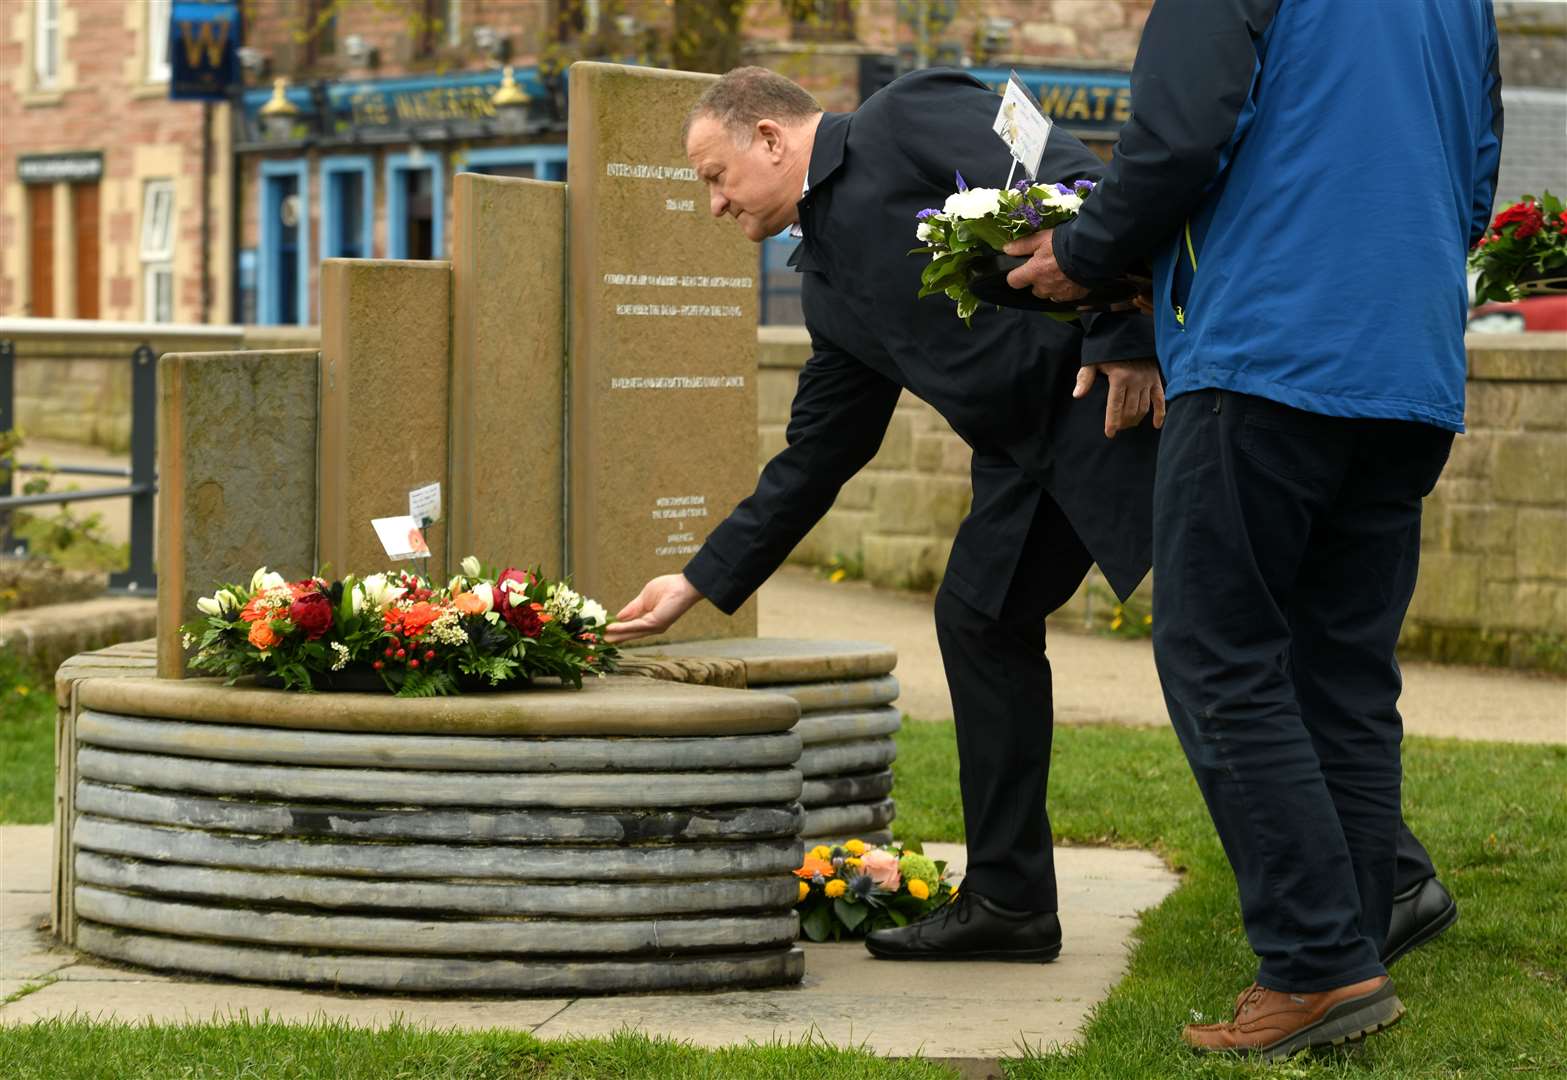 Inverness MP Drew Hendry places a wreath on the memorial.